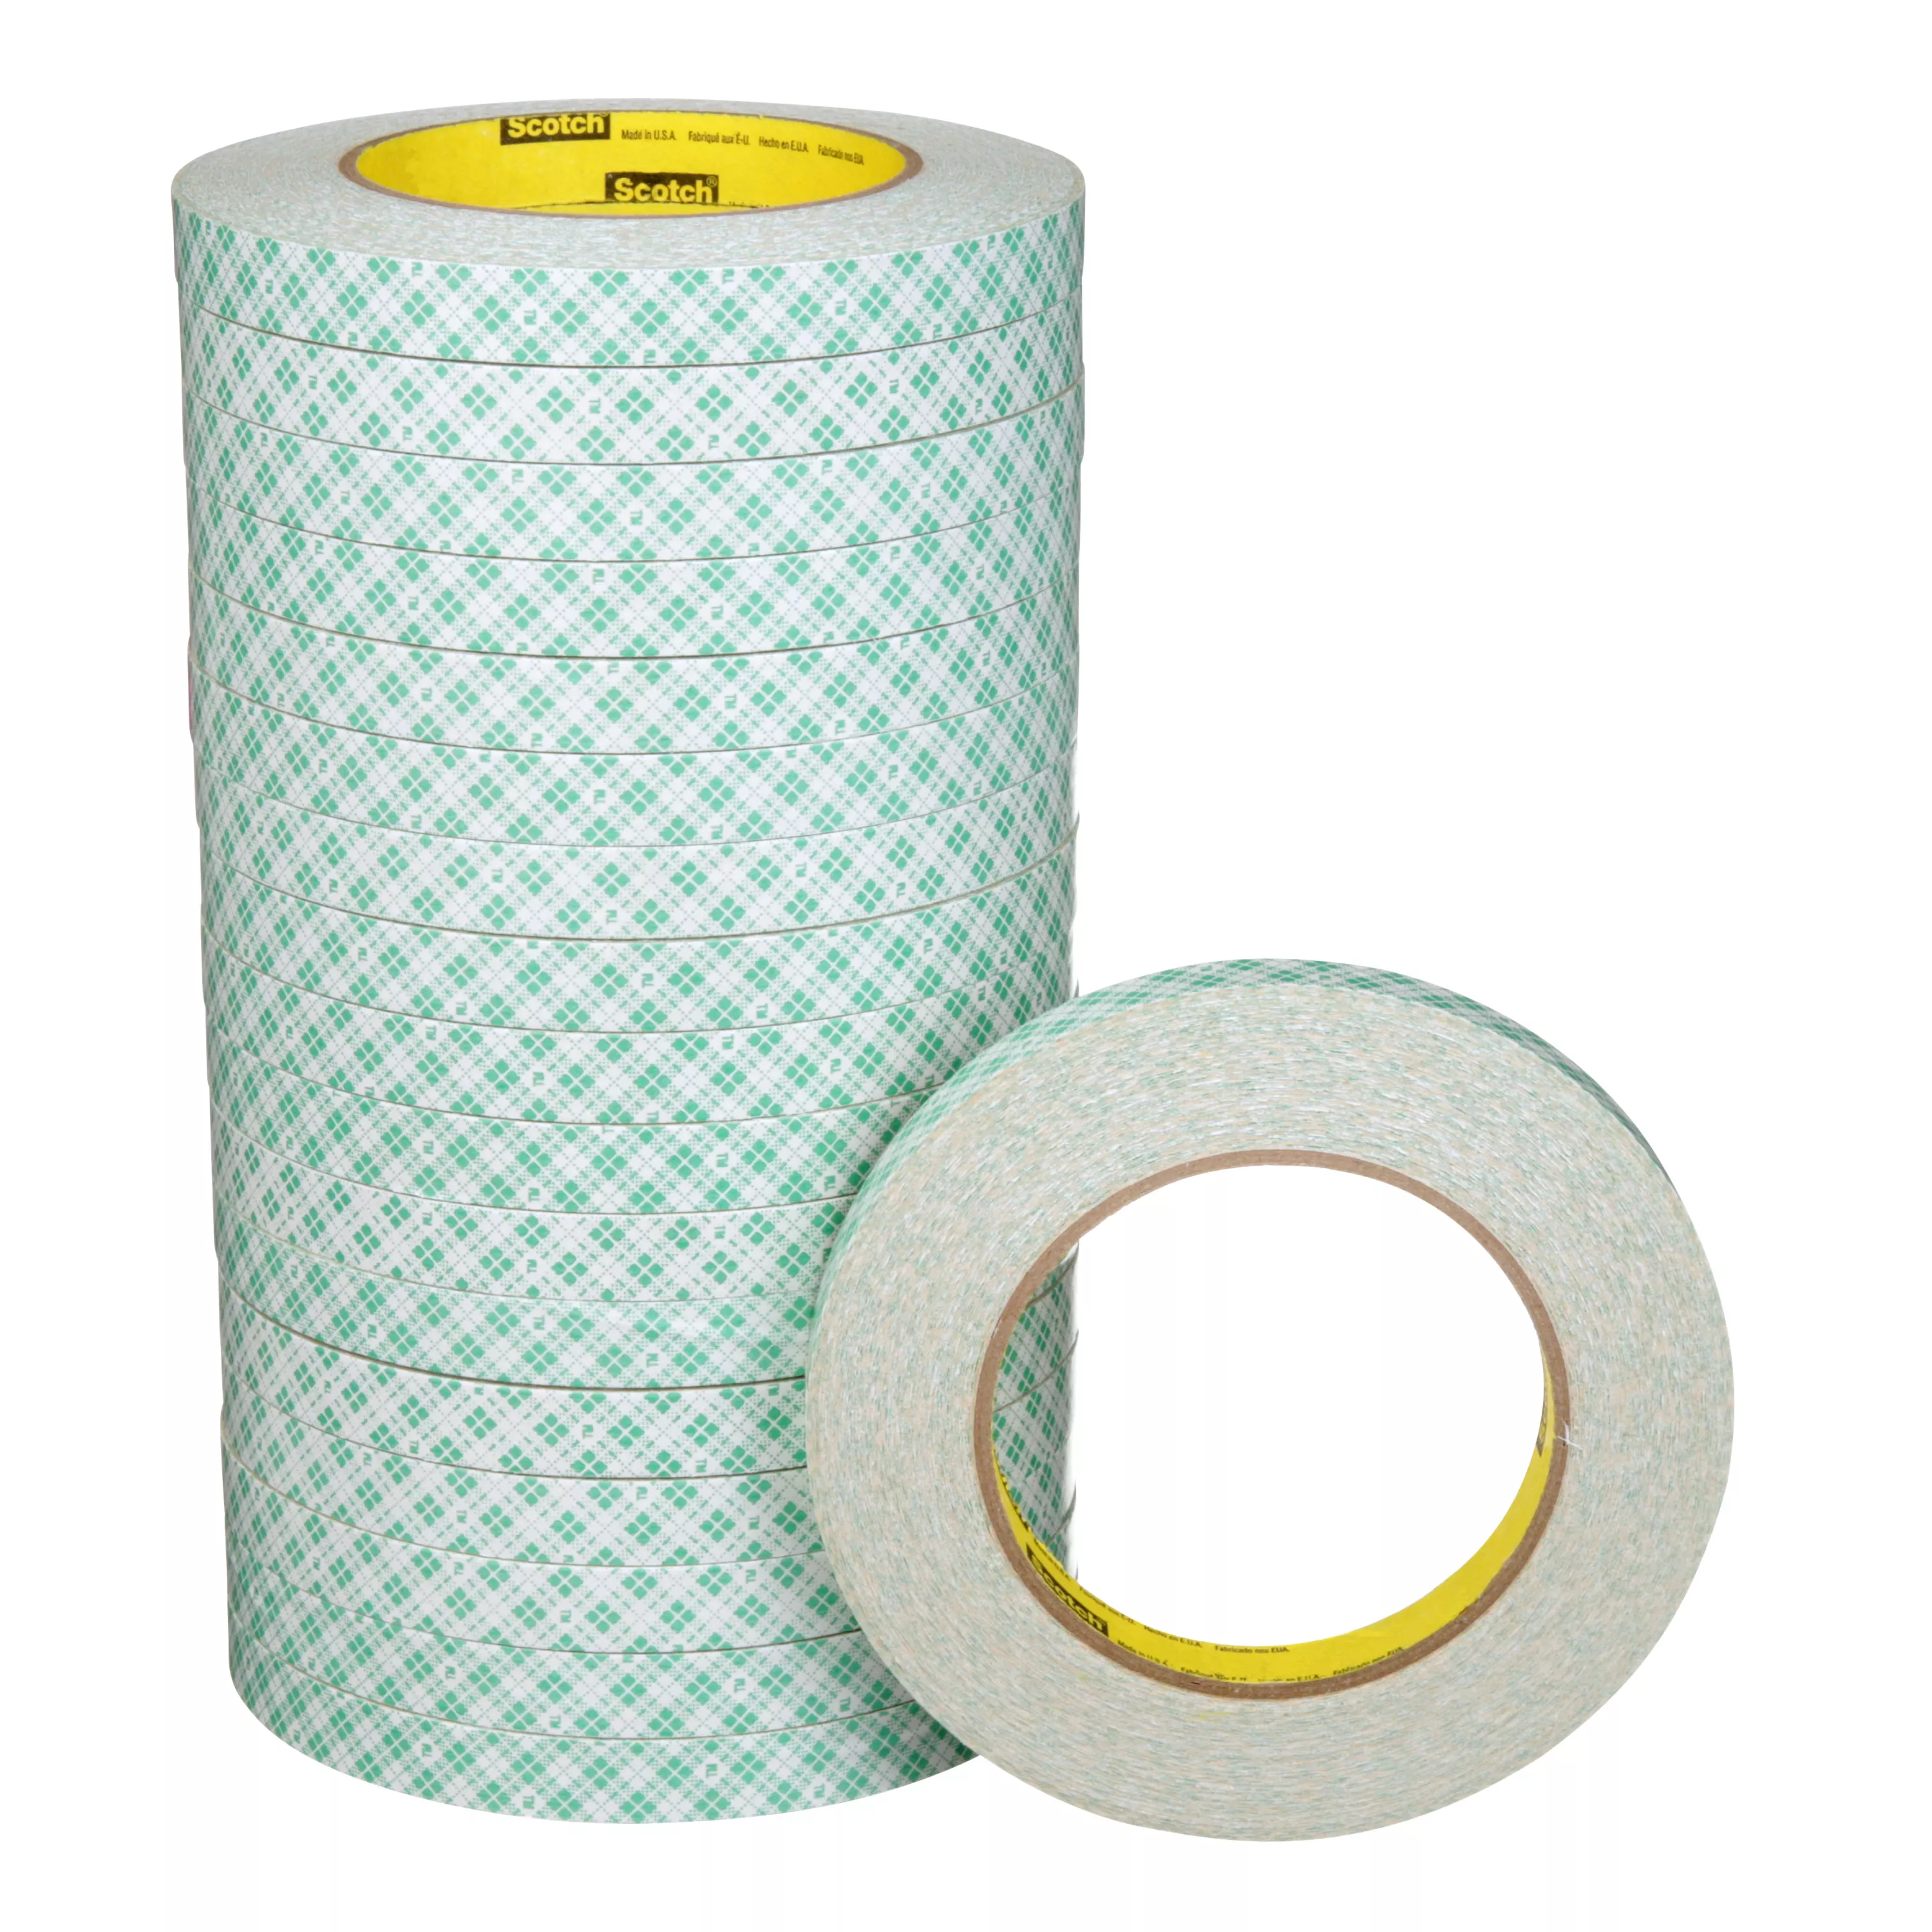 SKU 7000049272 | 3M™ Double Coated Paper Tape 410M